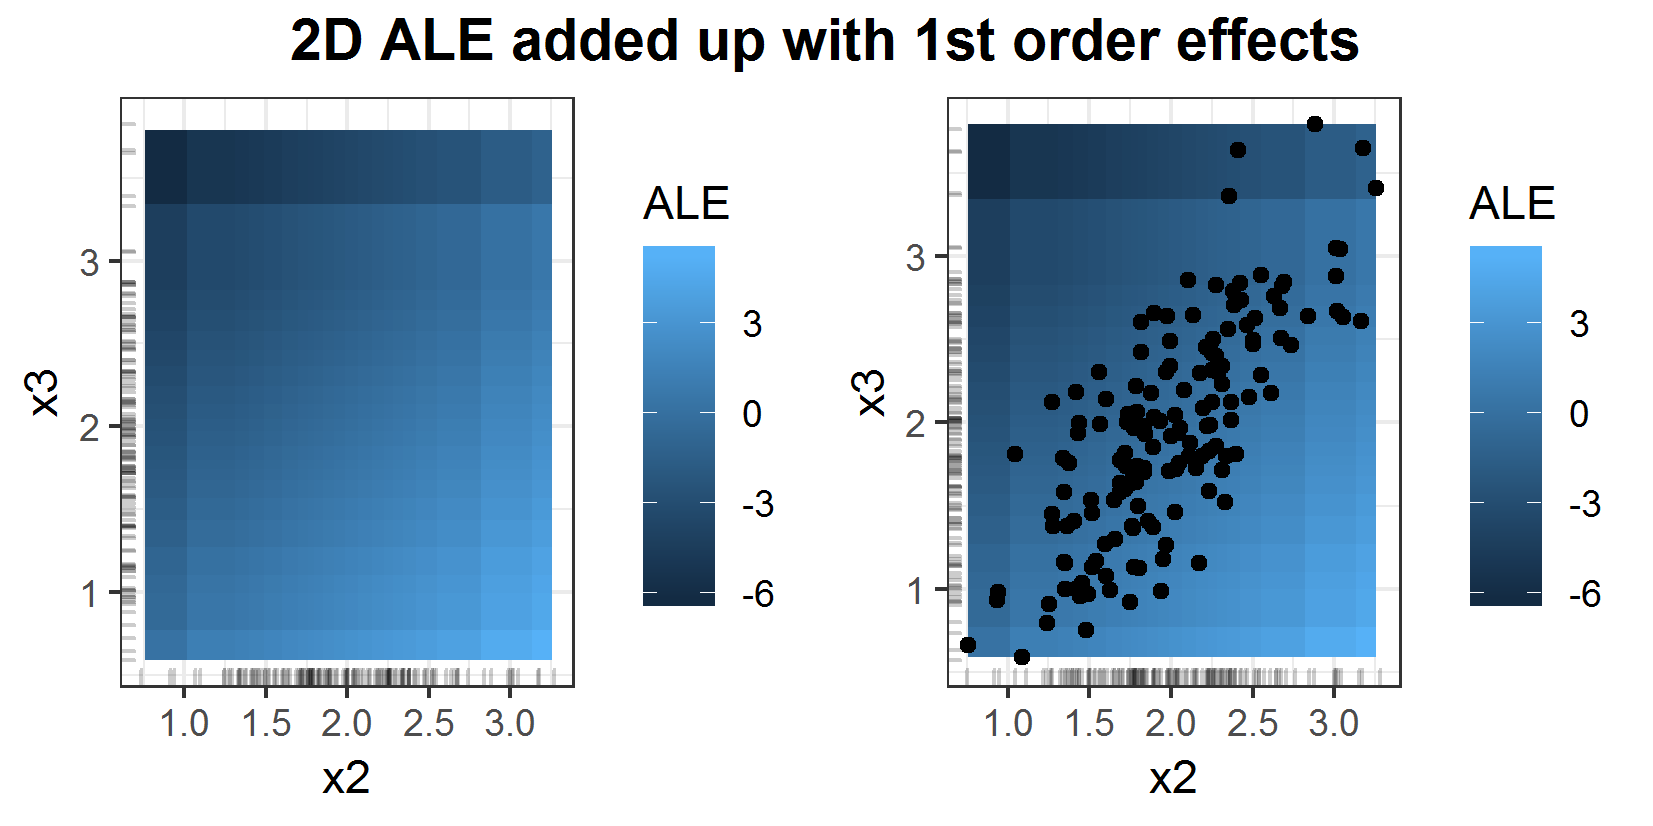 2D ALE added up with 1st order effects of features \(x_2\) and \(x_3\) for prediction function \(f(x_1, x_2, x_3) = x_1 + x_2 - x_3\). In the right plot the underlying 2 dimensional data points are included.